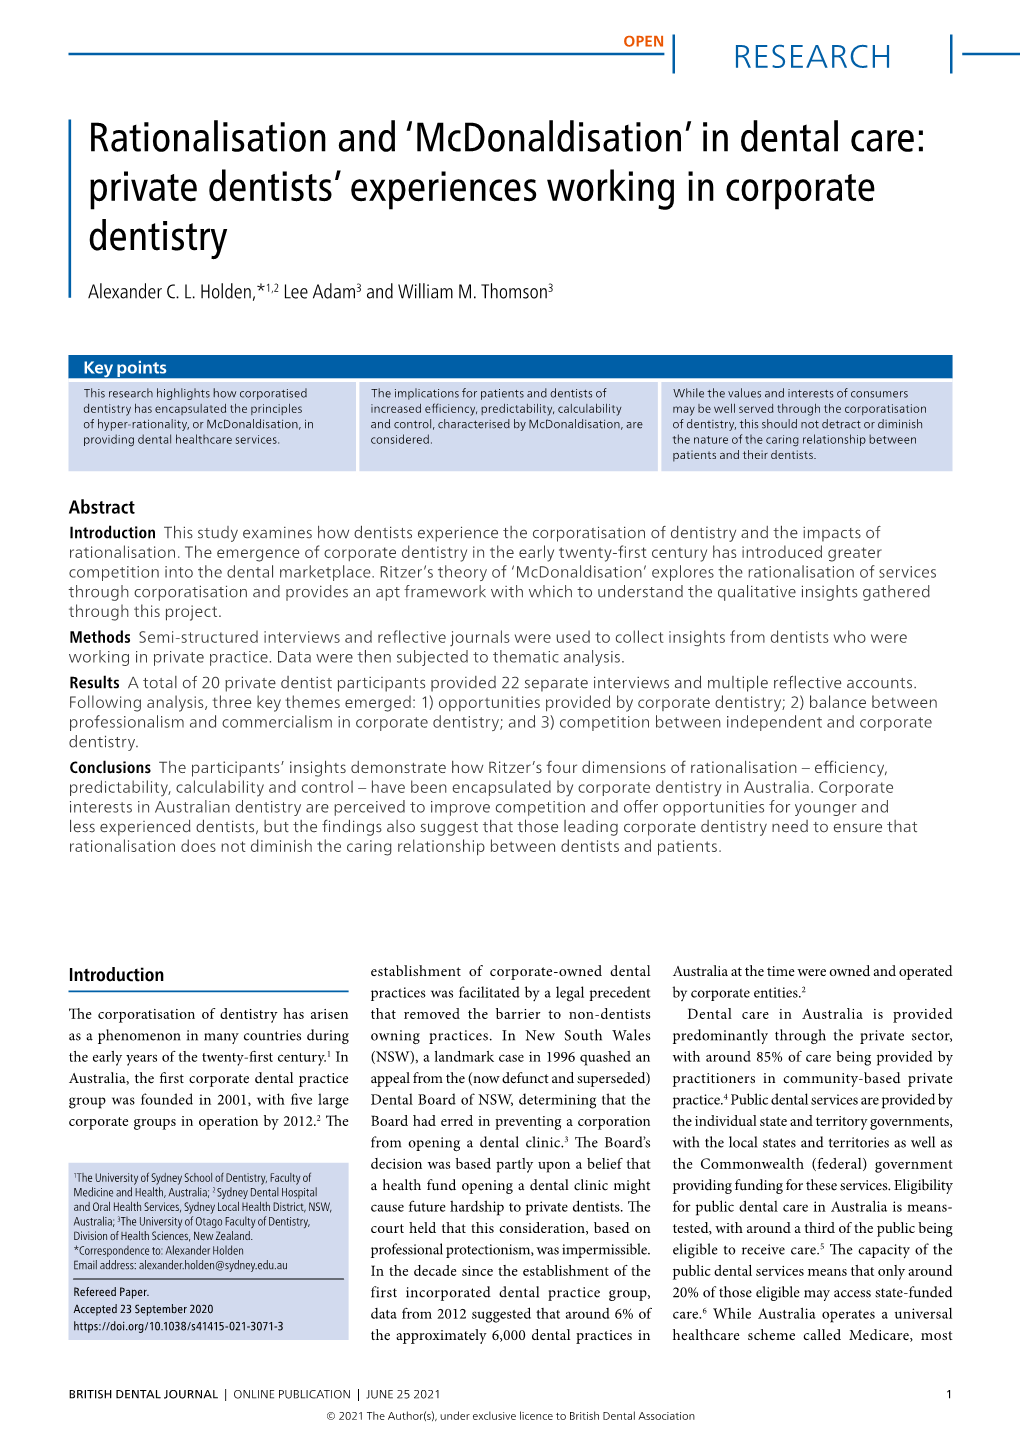 Private Dentists' Experiences Working in Corporate Dentistry